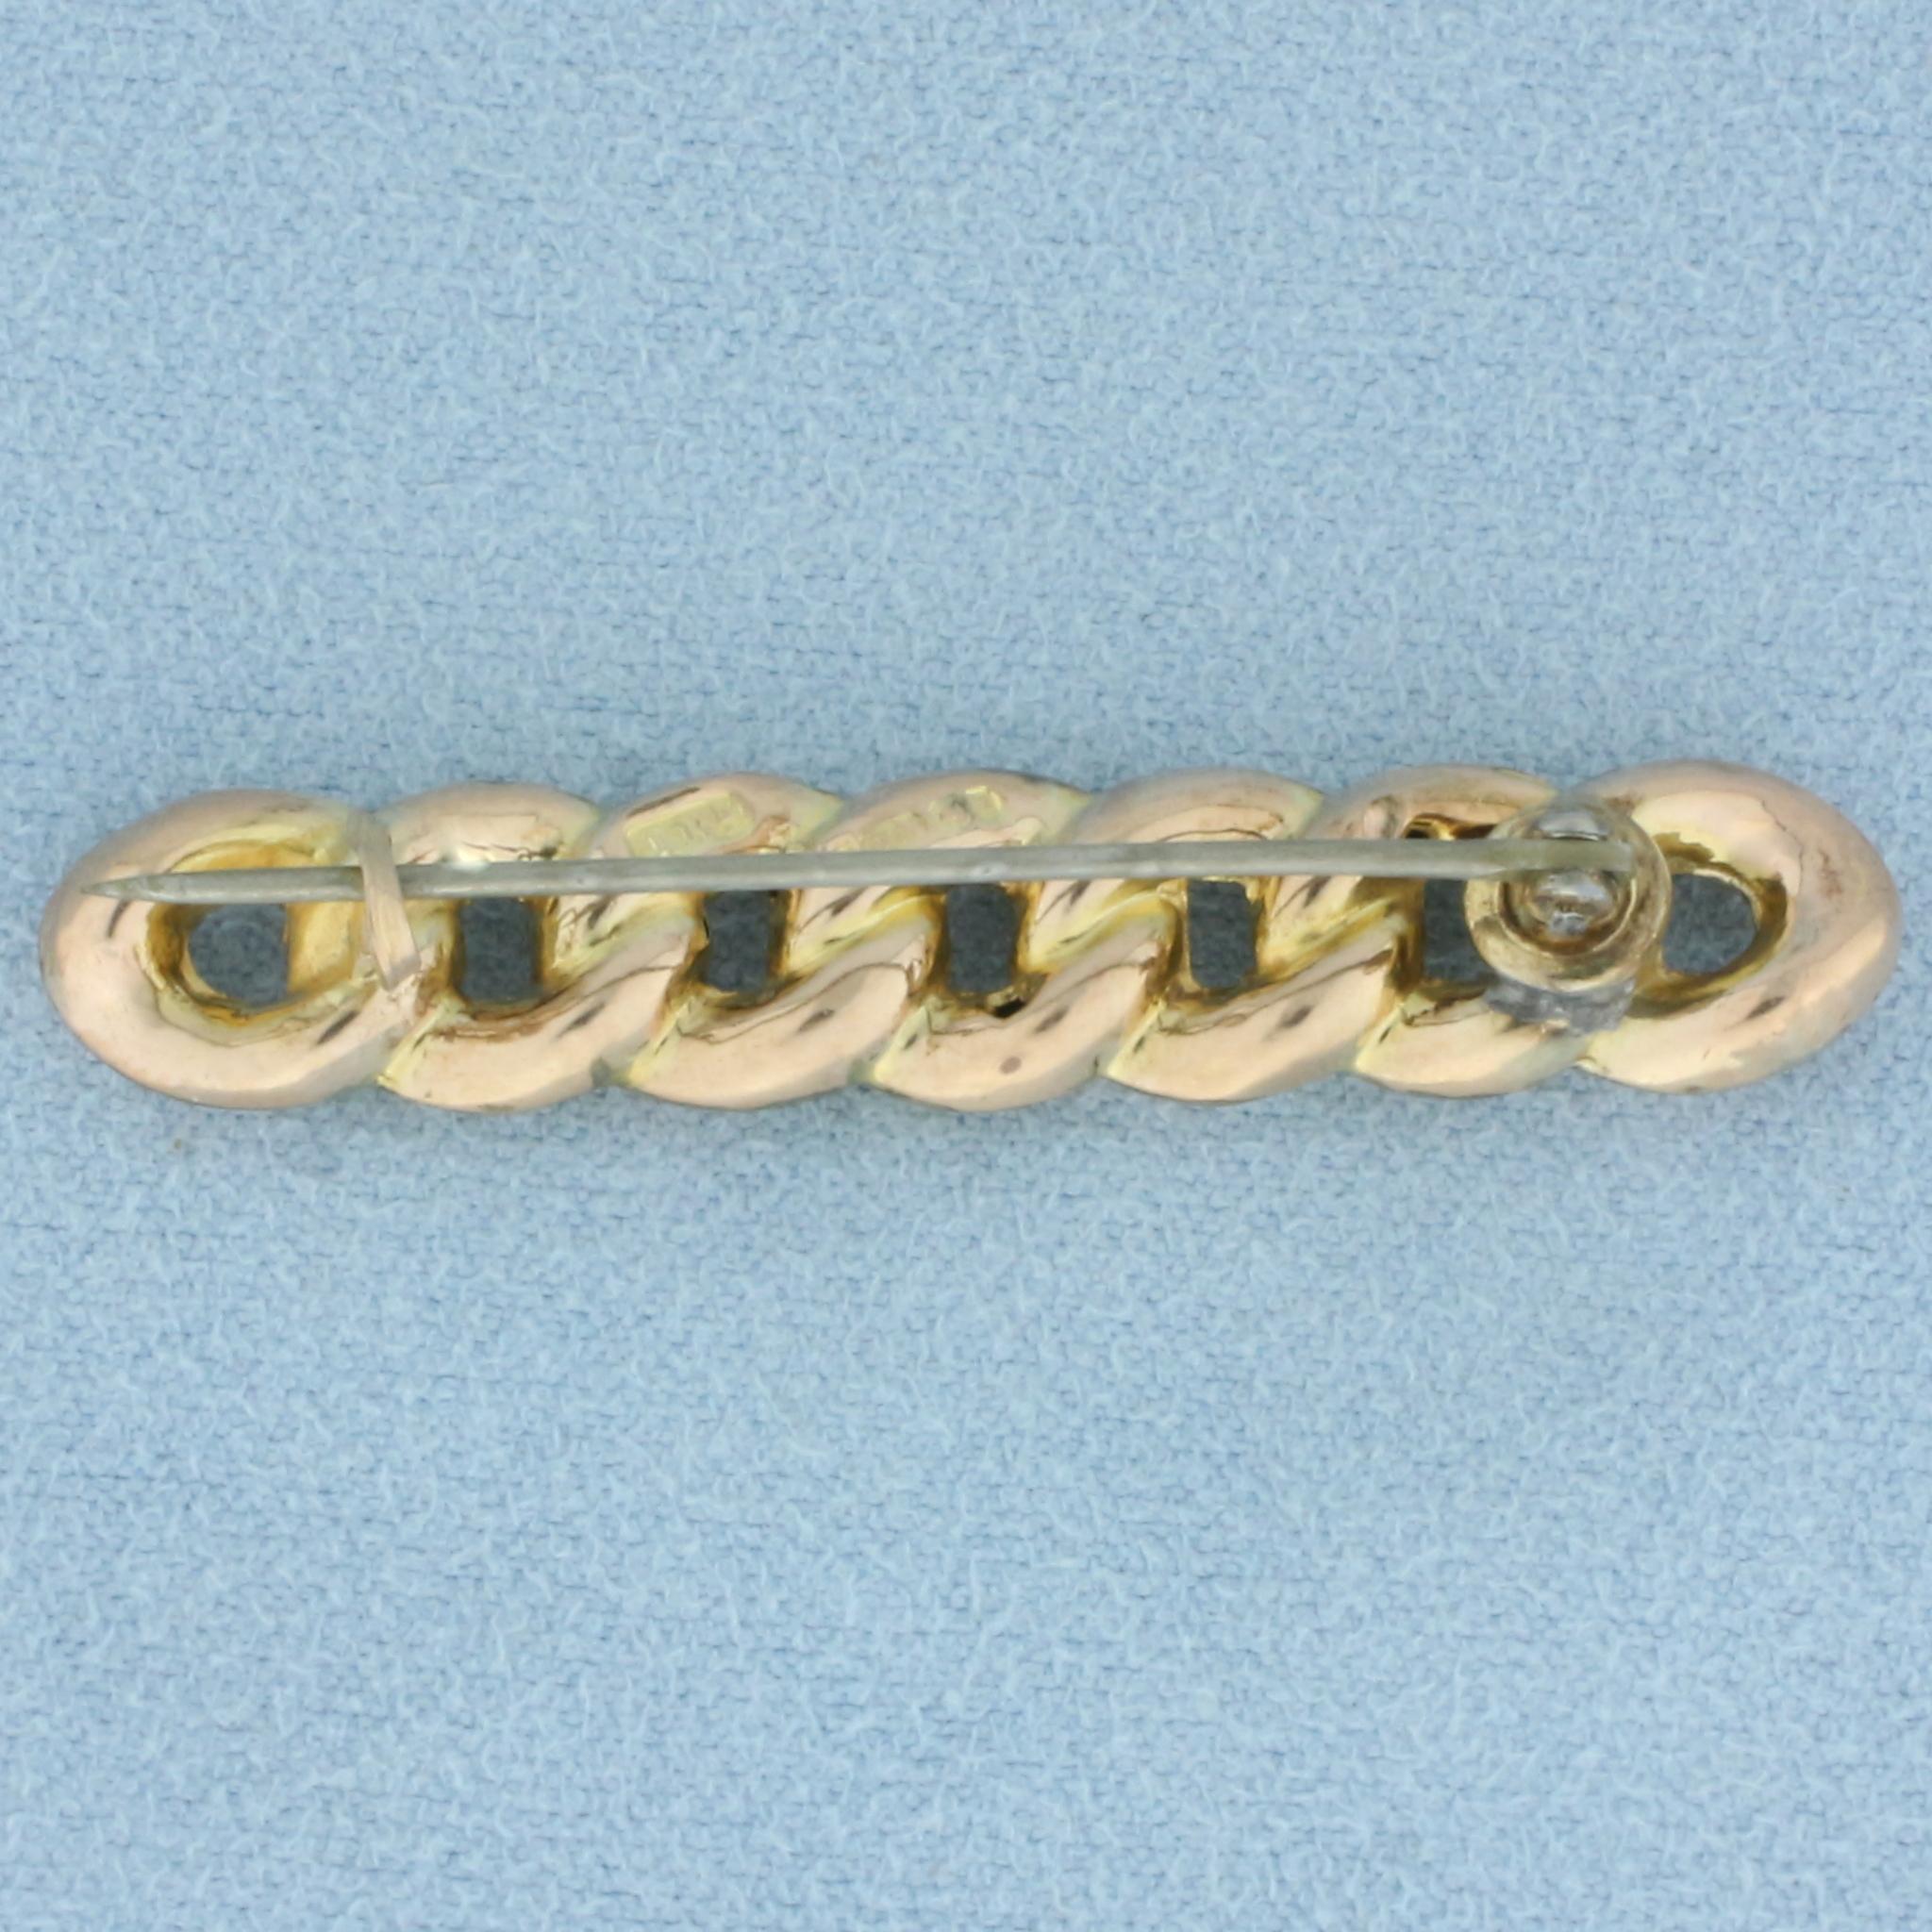 Antique Victorian Curb Link Pin In 9k Yellow And Rose Gold